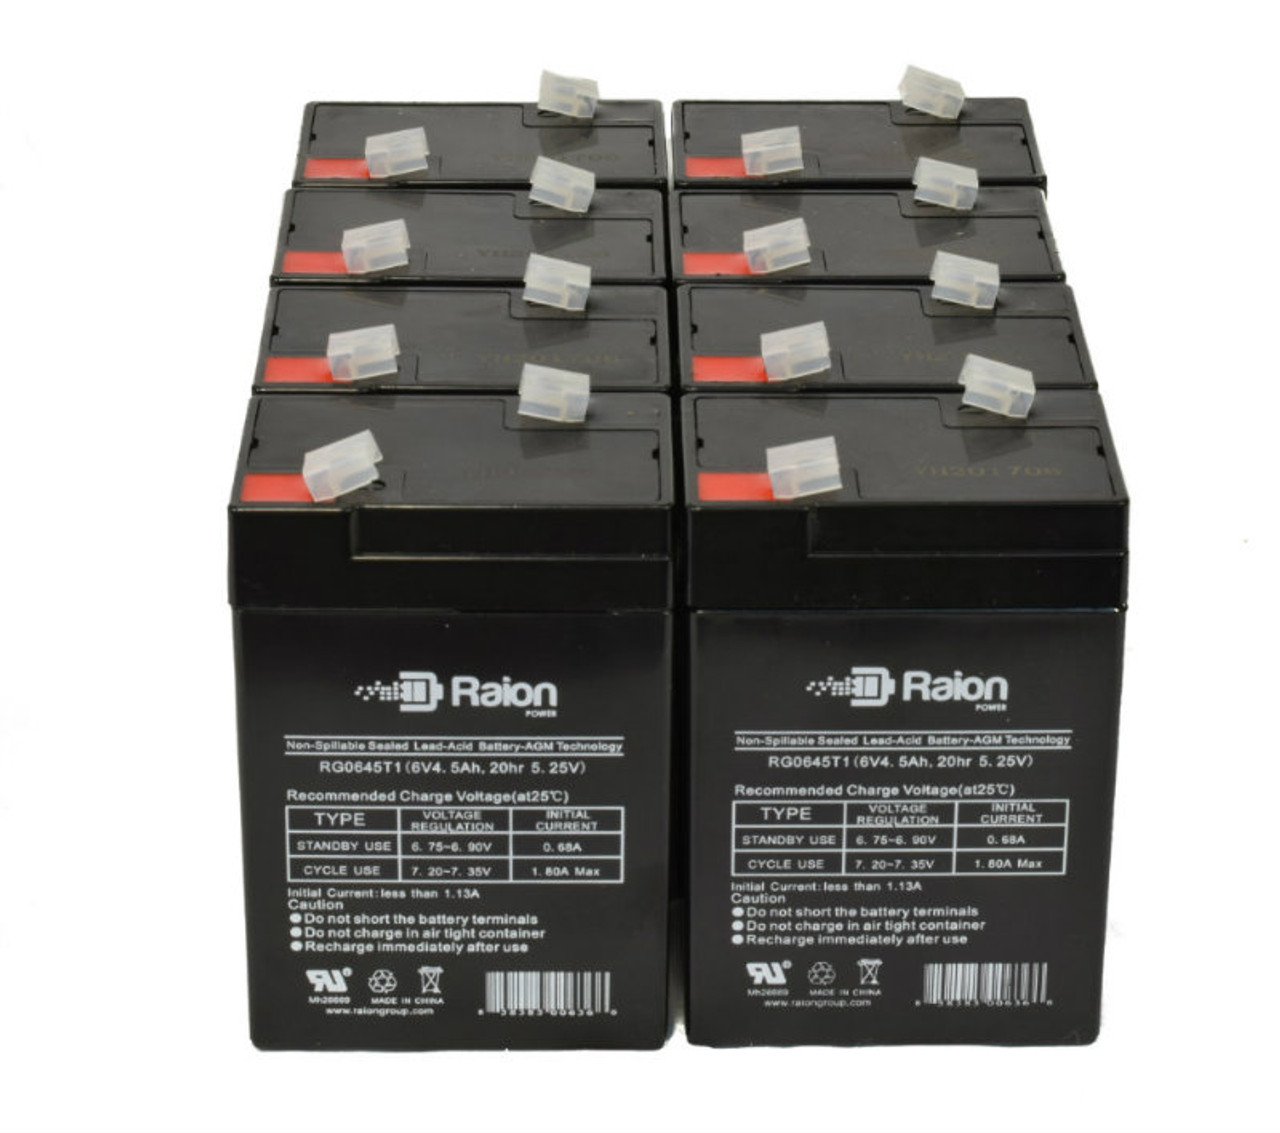 Raion Power RG0645T1 6V 4.5Ah Replacement Medical Equipment Battery for Castle Co 4900 Shampaine Surgical Table - 8 Pack